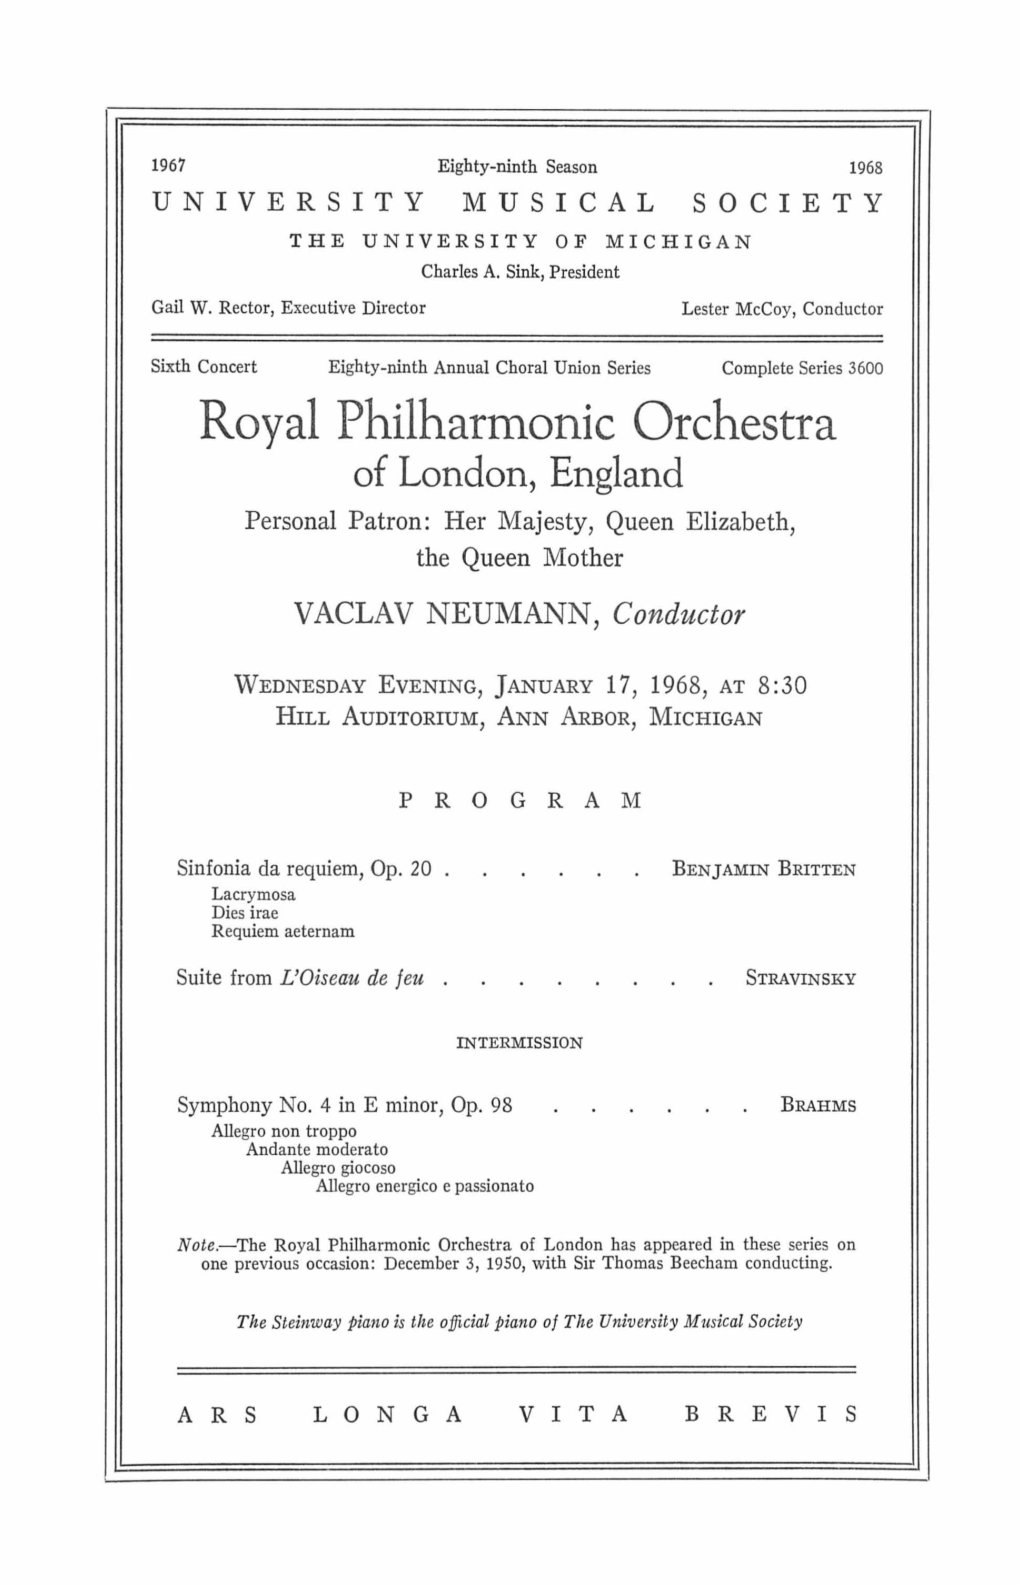 Royal Philharmonic Orchestra of London, England Personal Patron: Her Majesty, Queen Elizabeth, the Queen Mother VACLAV NEUMANN, Conductor